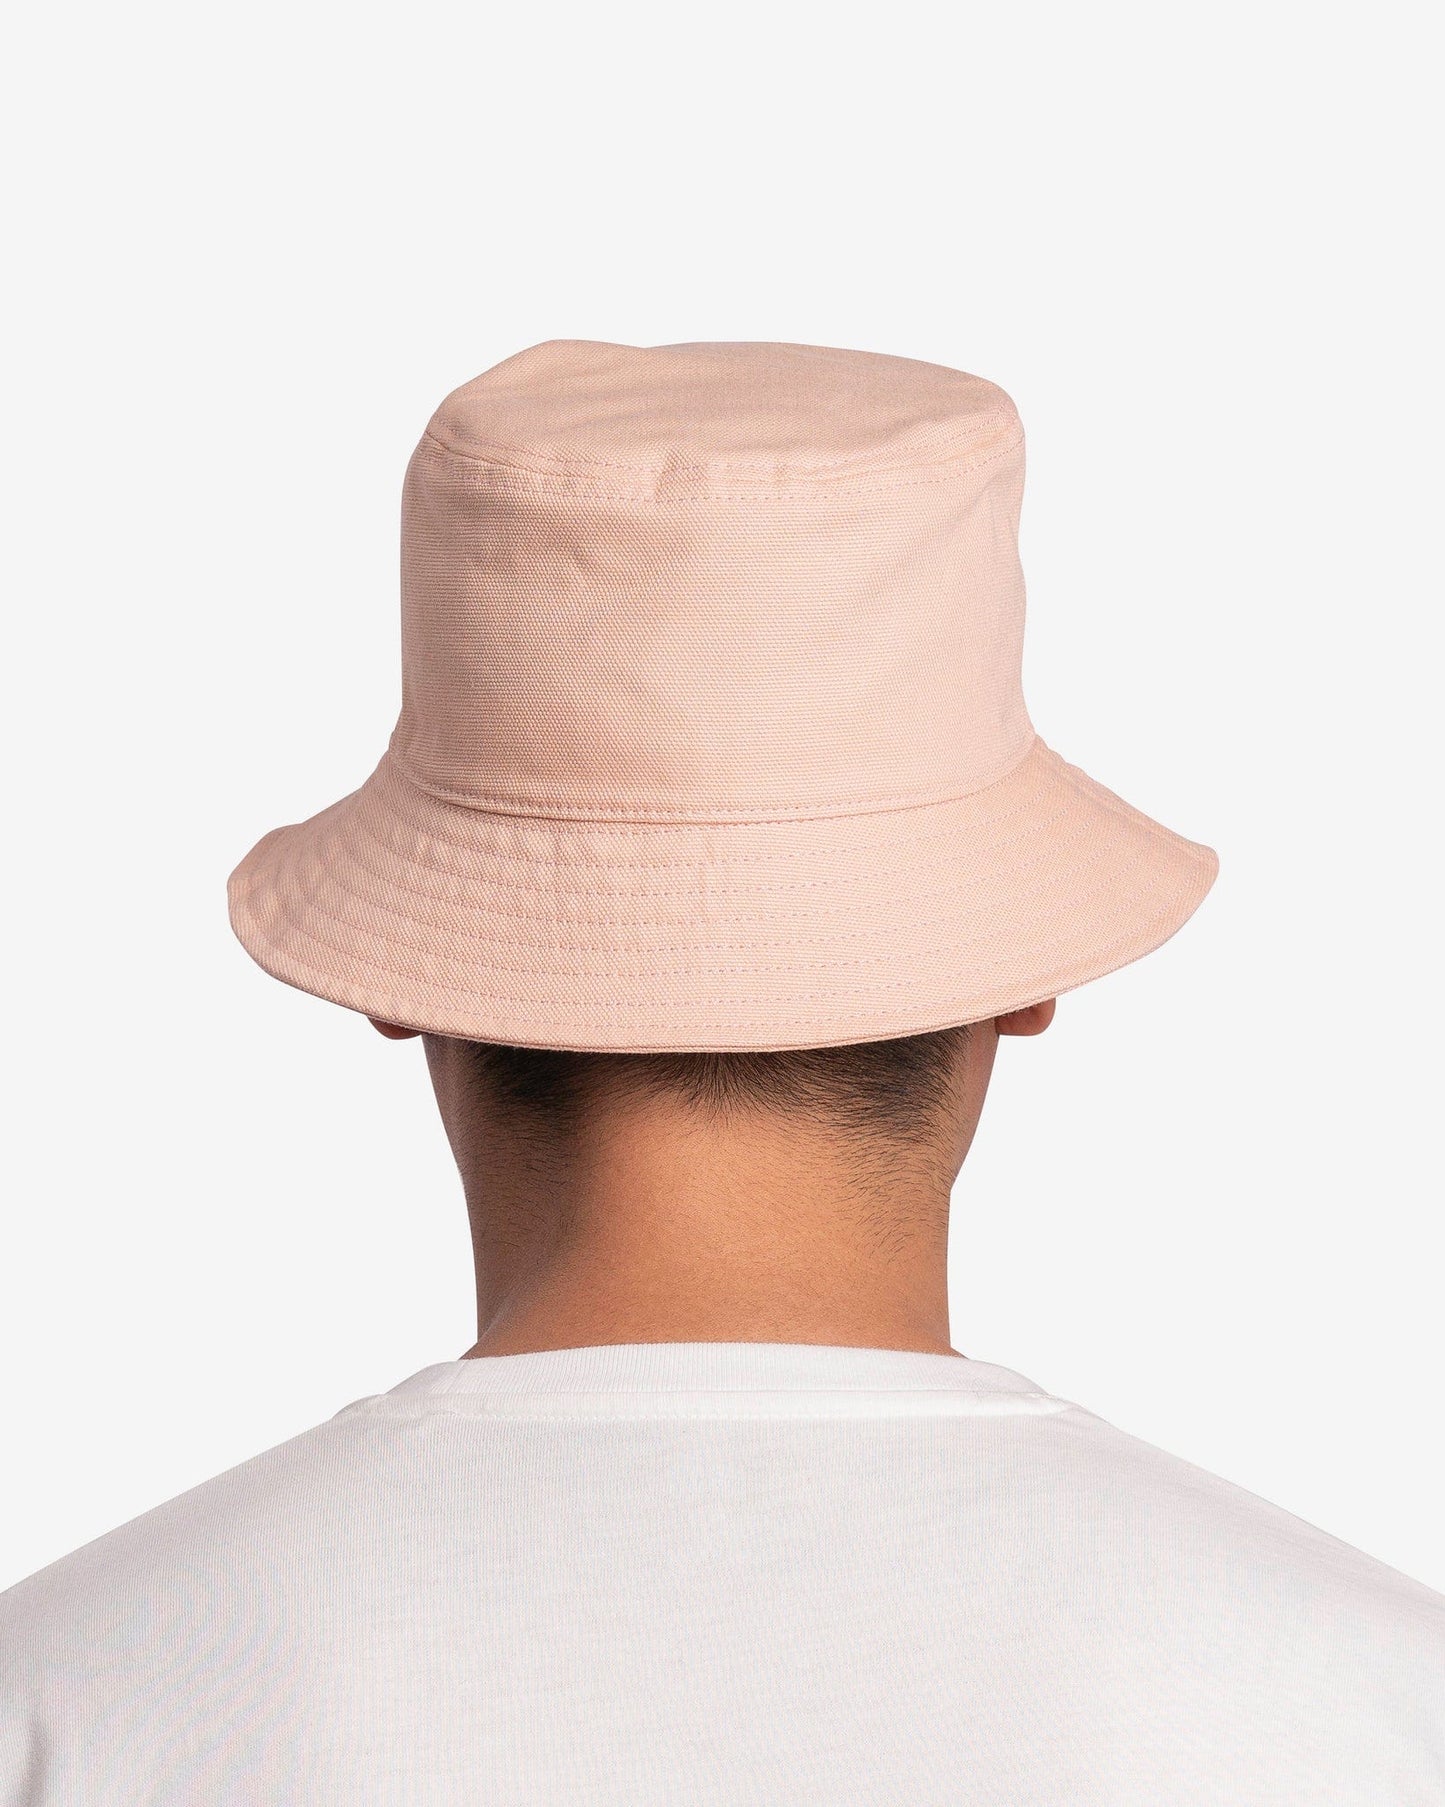 Raf Simons Men's Hats Small Leather Patch Bucket Hat in Salmon